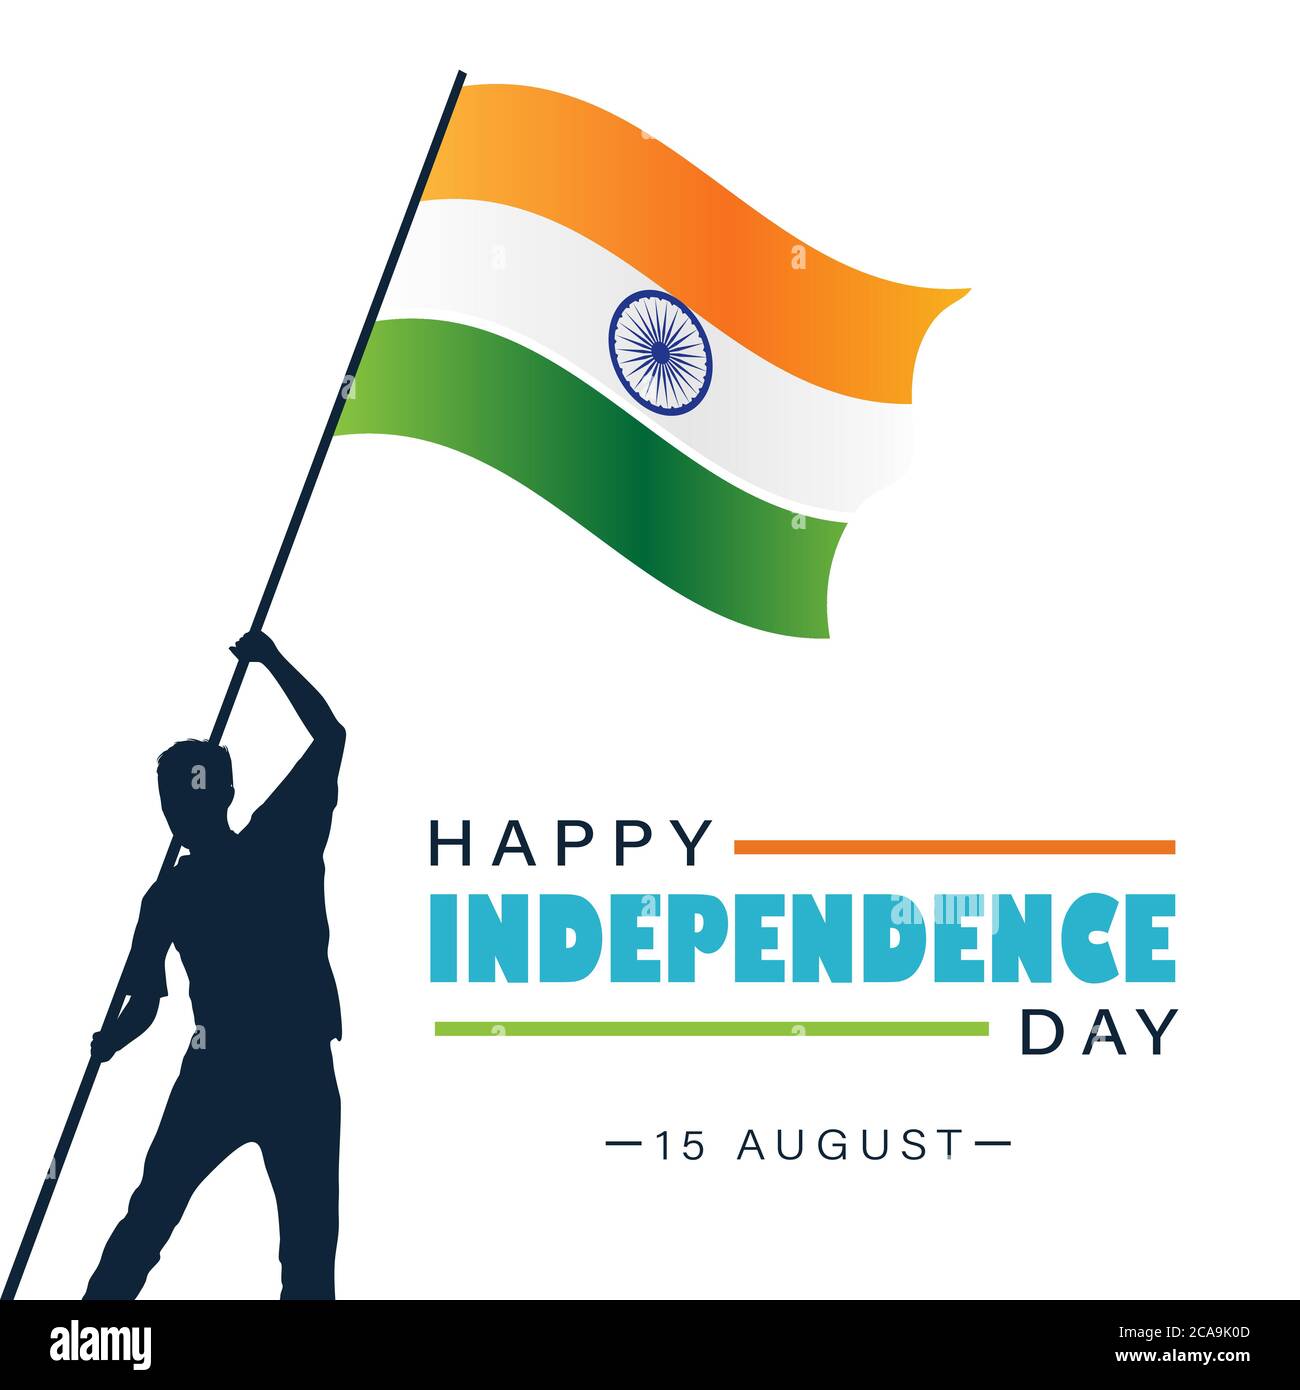 Happy Independence Day India, 15 August, man hoisting Indian flag ...